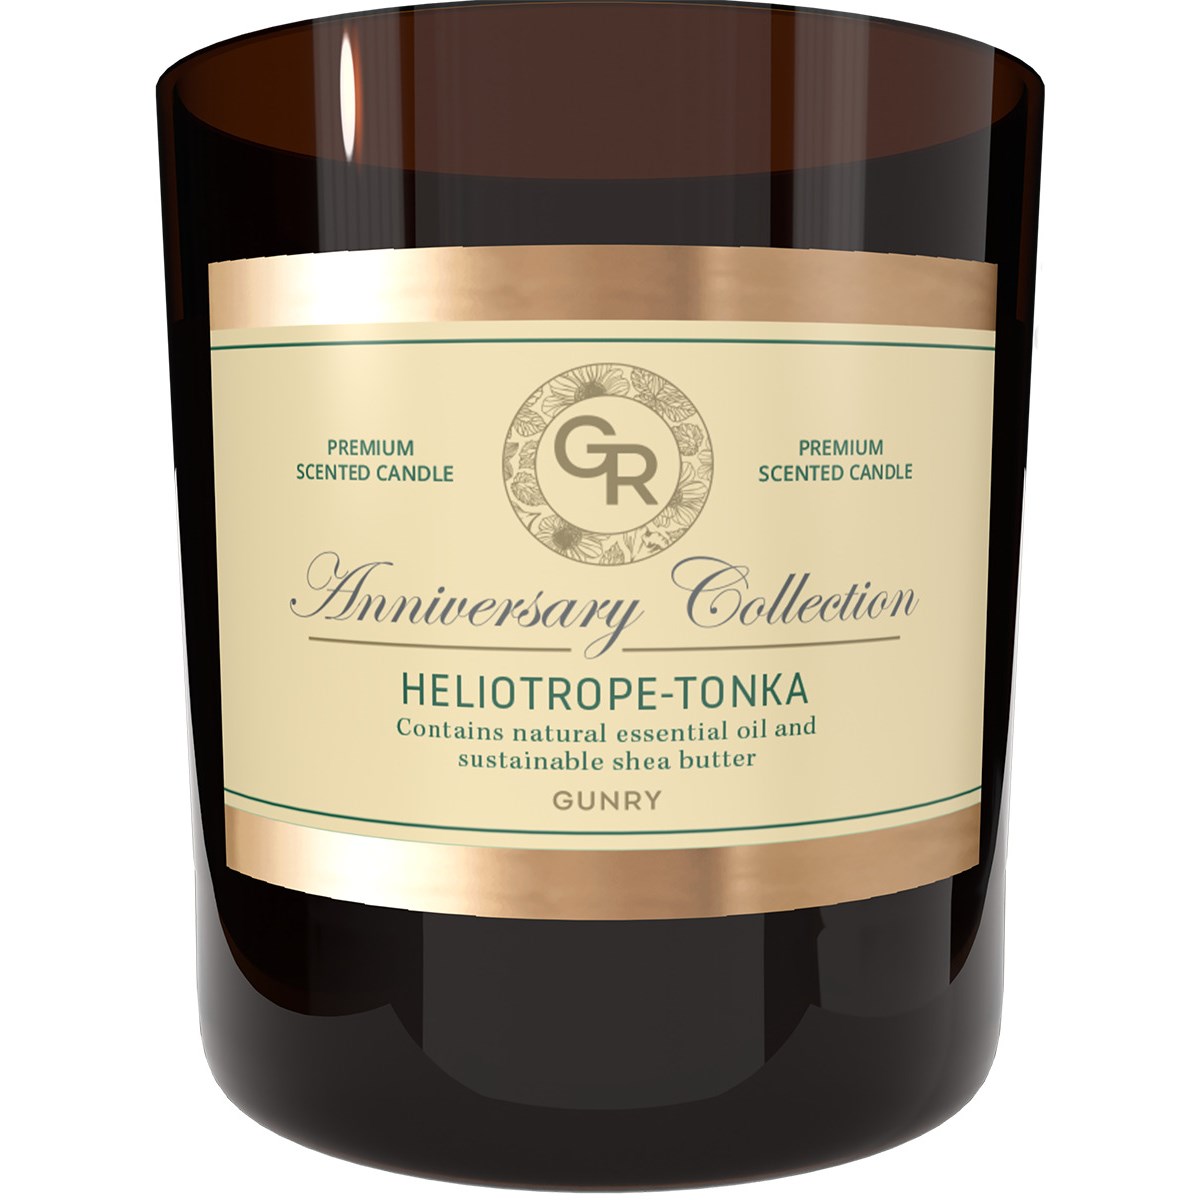 Gunry Heliotrope Tonka Anniversary Collection Scented Candle 115